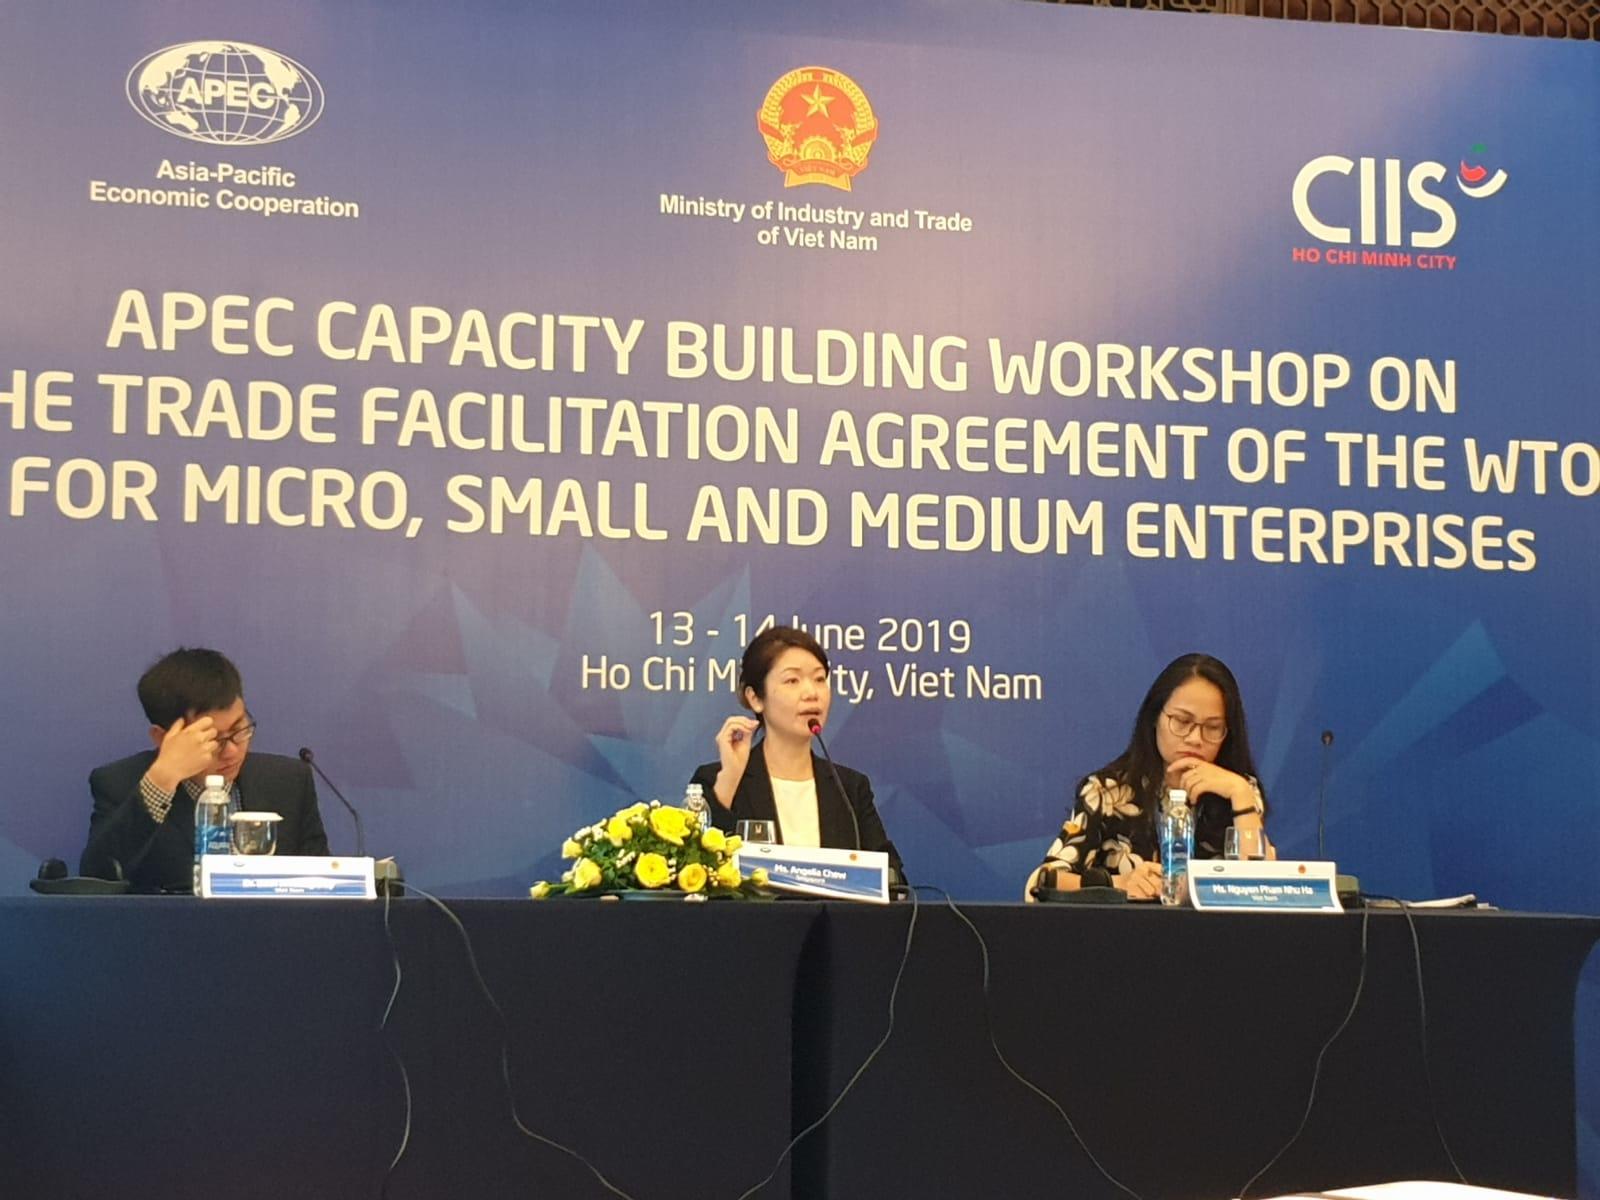 Capacity-Building Partner for Asia-Pacific Economic Cooperation (APEC) to introduce the WTO Trade Facilitation Agreement and how Micro Small Medium Enterprises can benefit (held in Ho Chi Minh City, Vietnam June 2019)